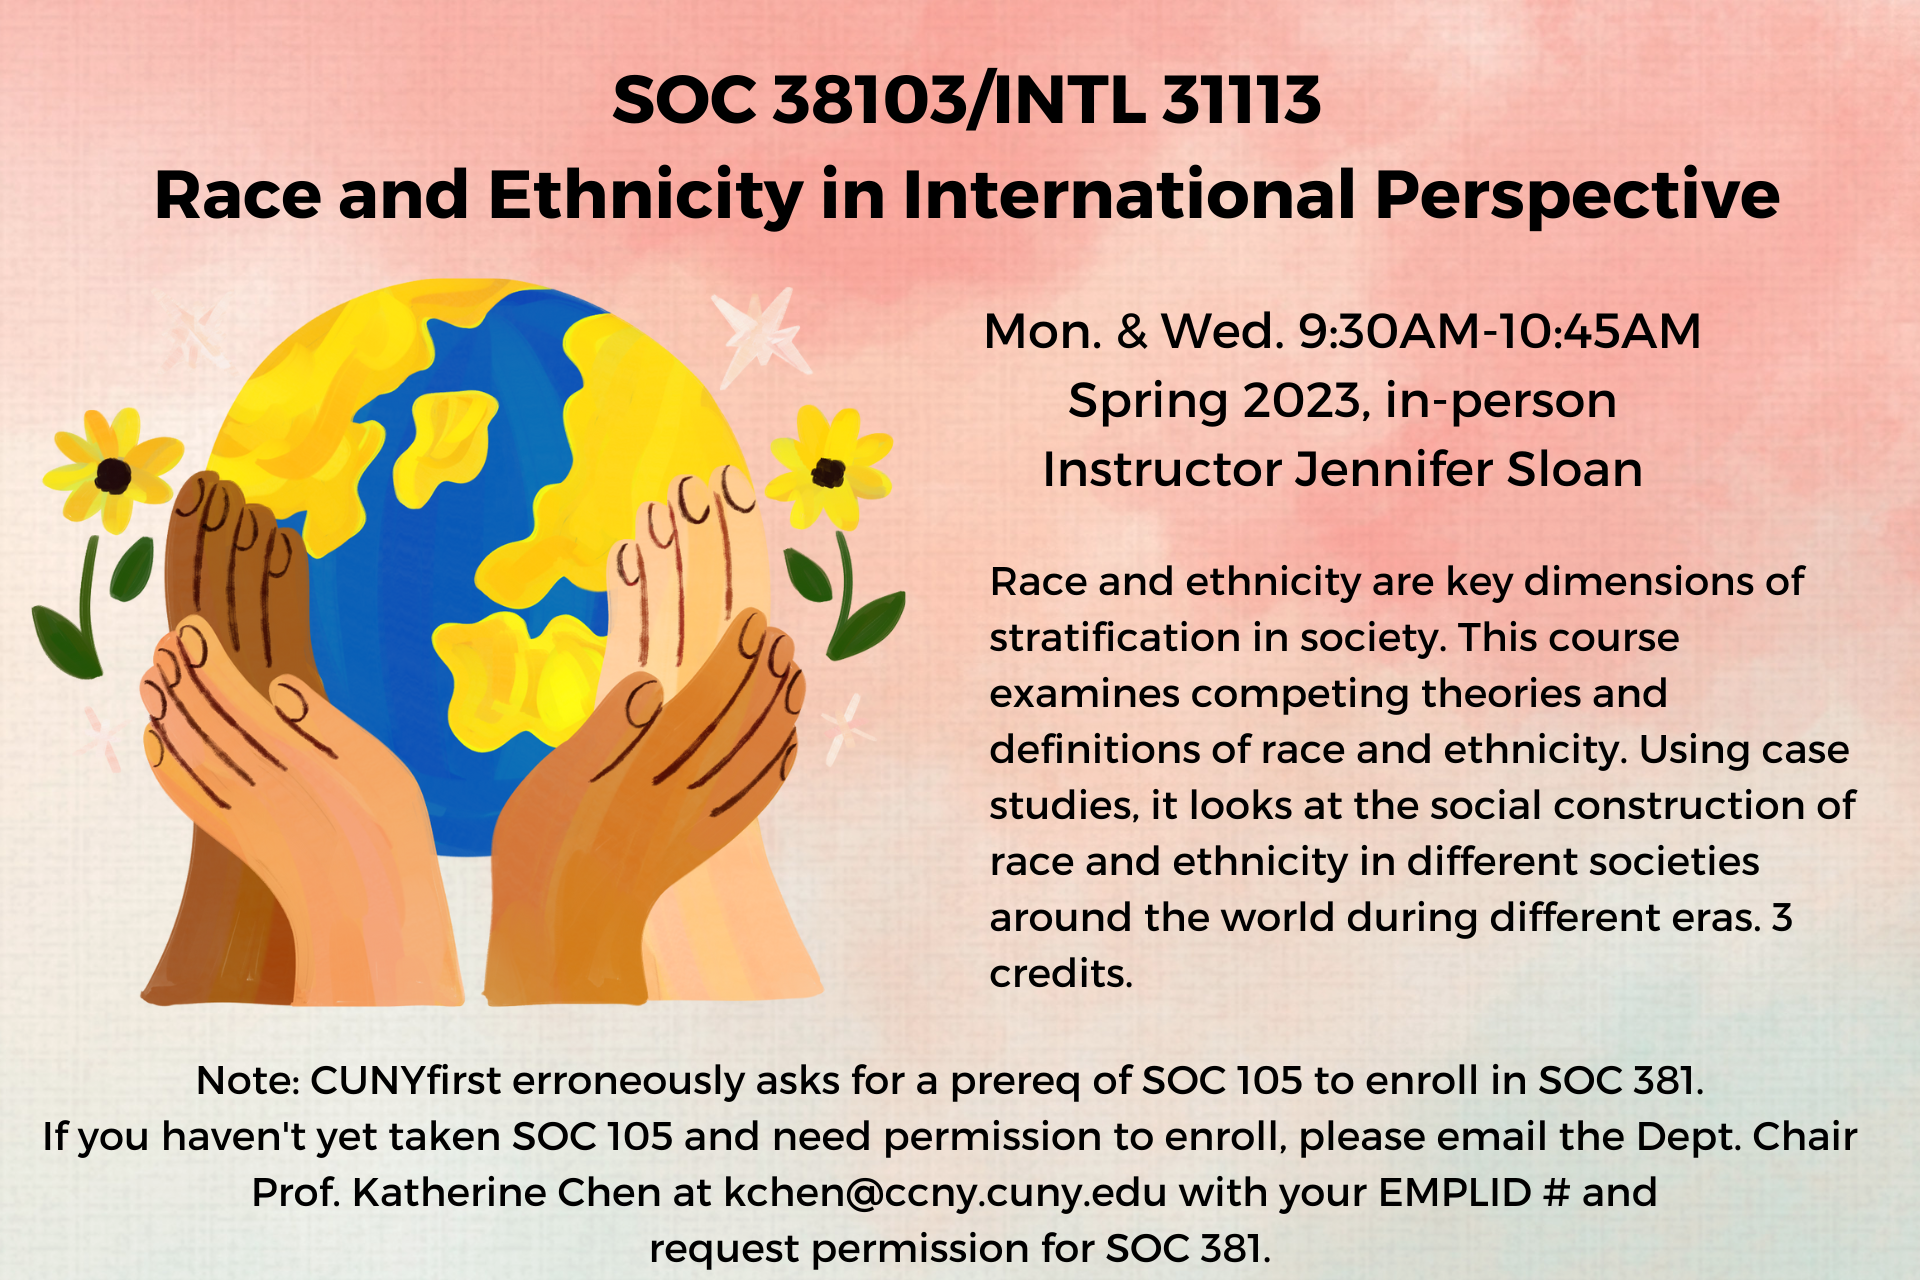 SOC 38103/INTL 31113 Race and Ethnicity in International Perspective​ Spring 2023 Course